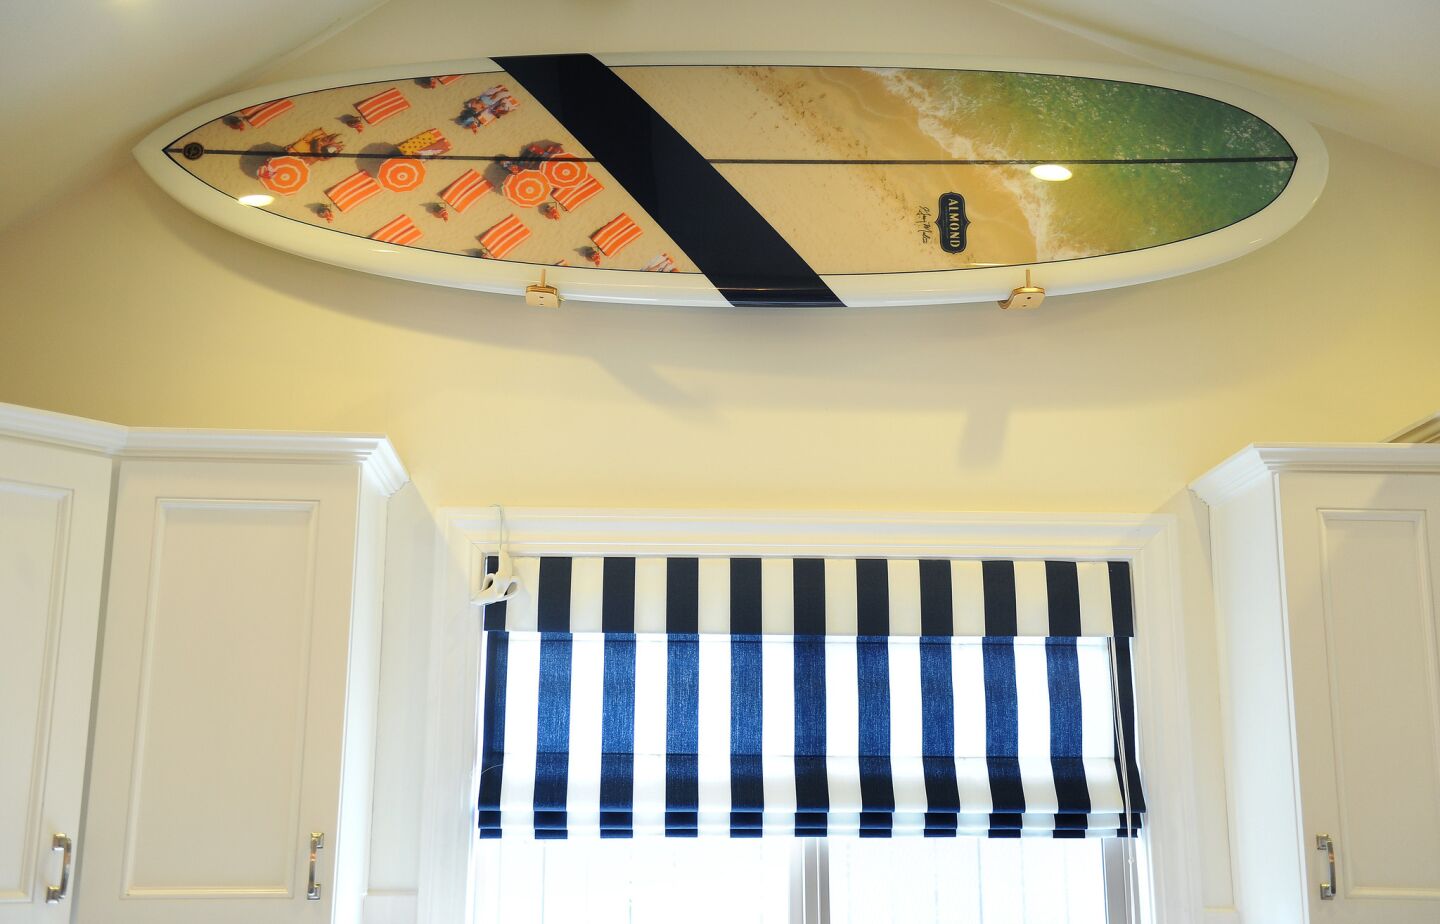 A Gray Malin and Almond surfboard is installed above the kitchen window.